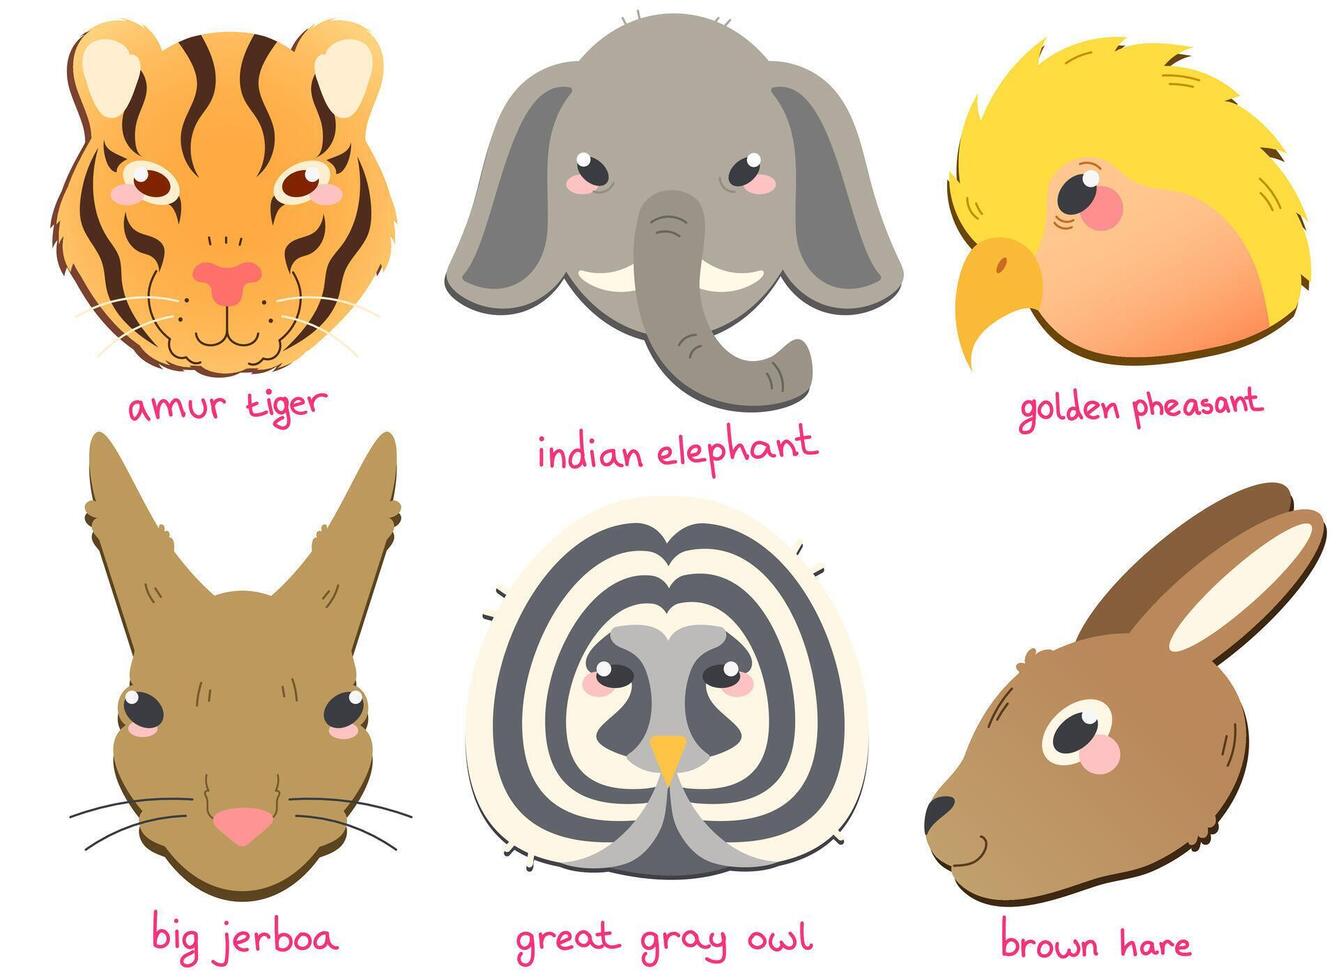 Colored vector icon set in flat style with various animals from Eurasia